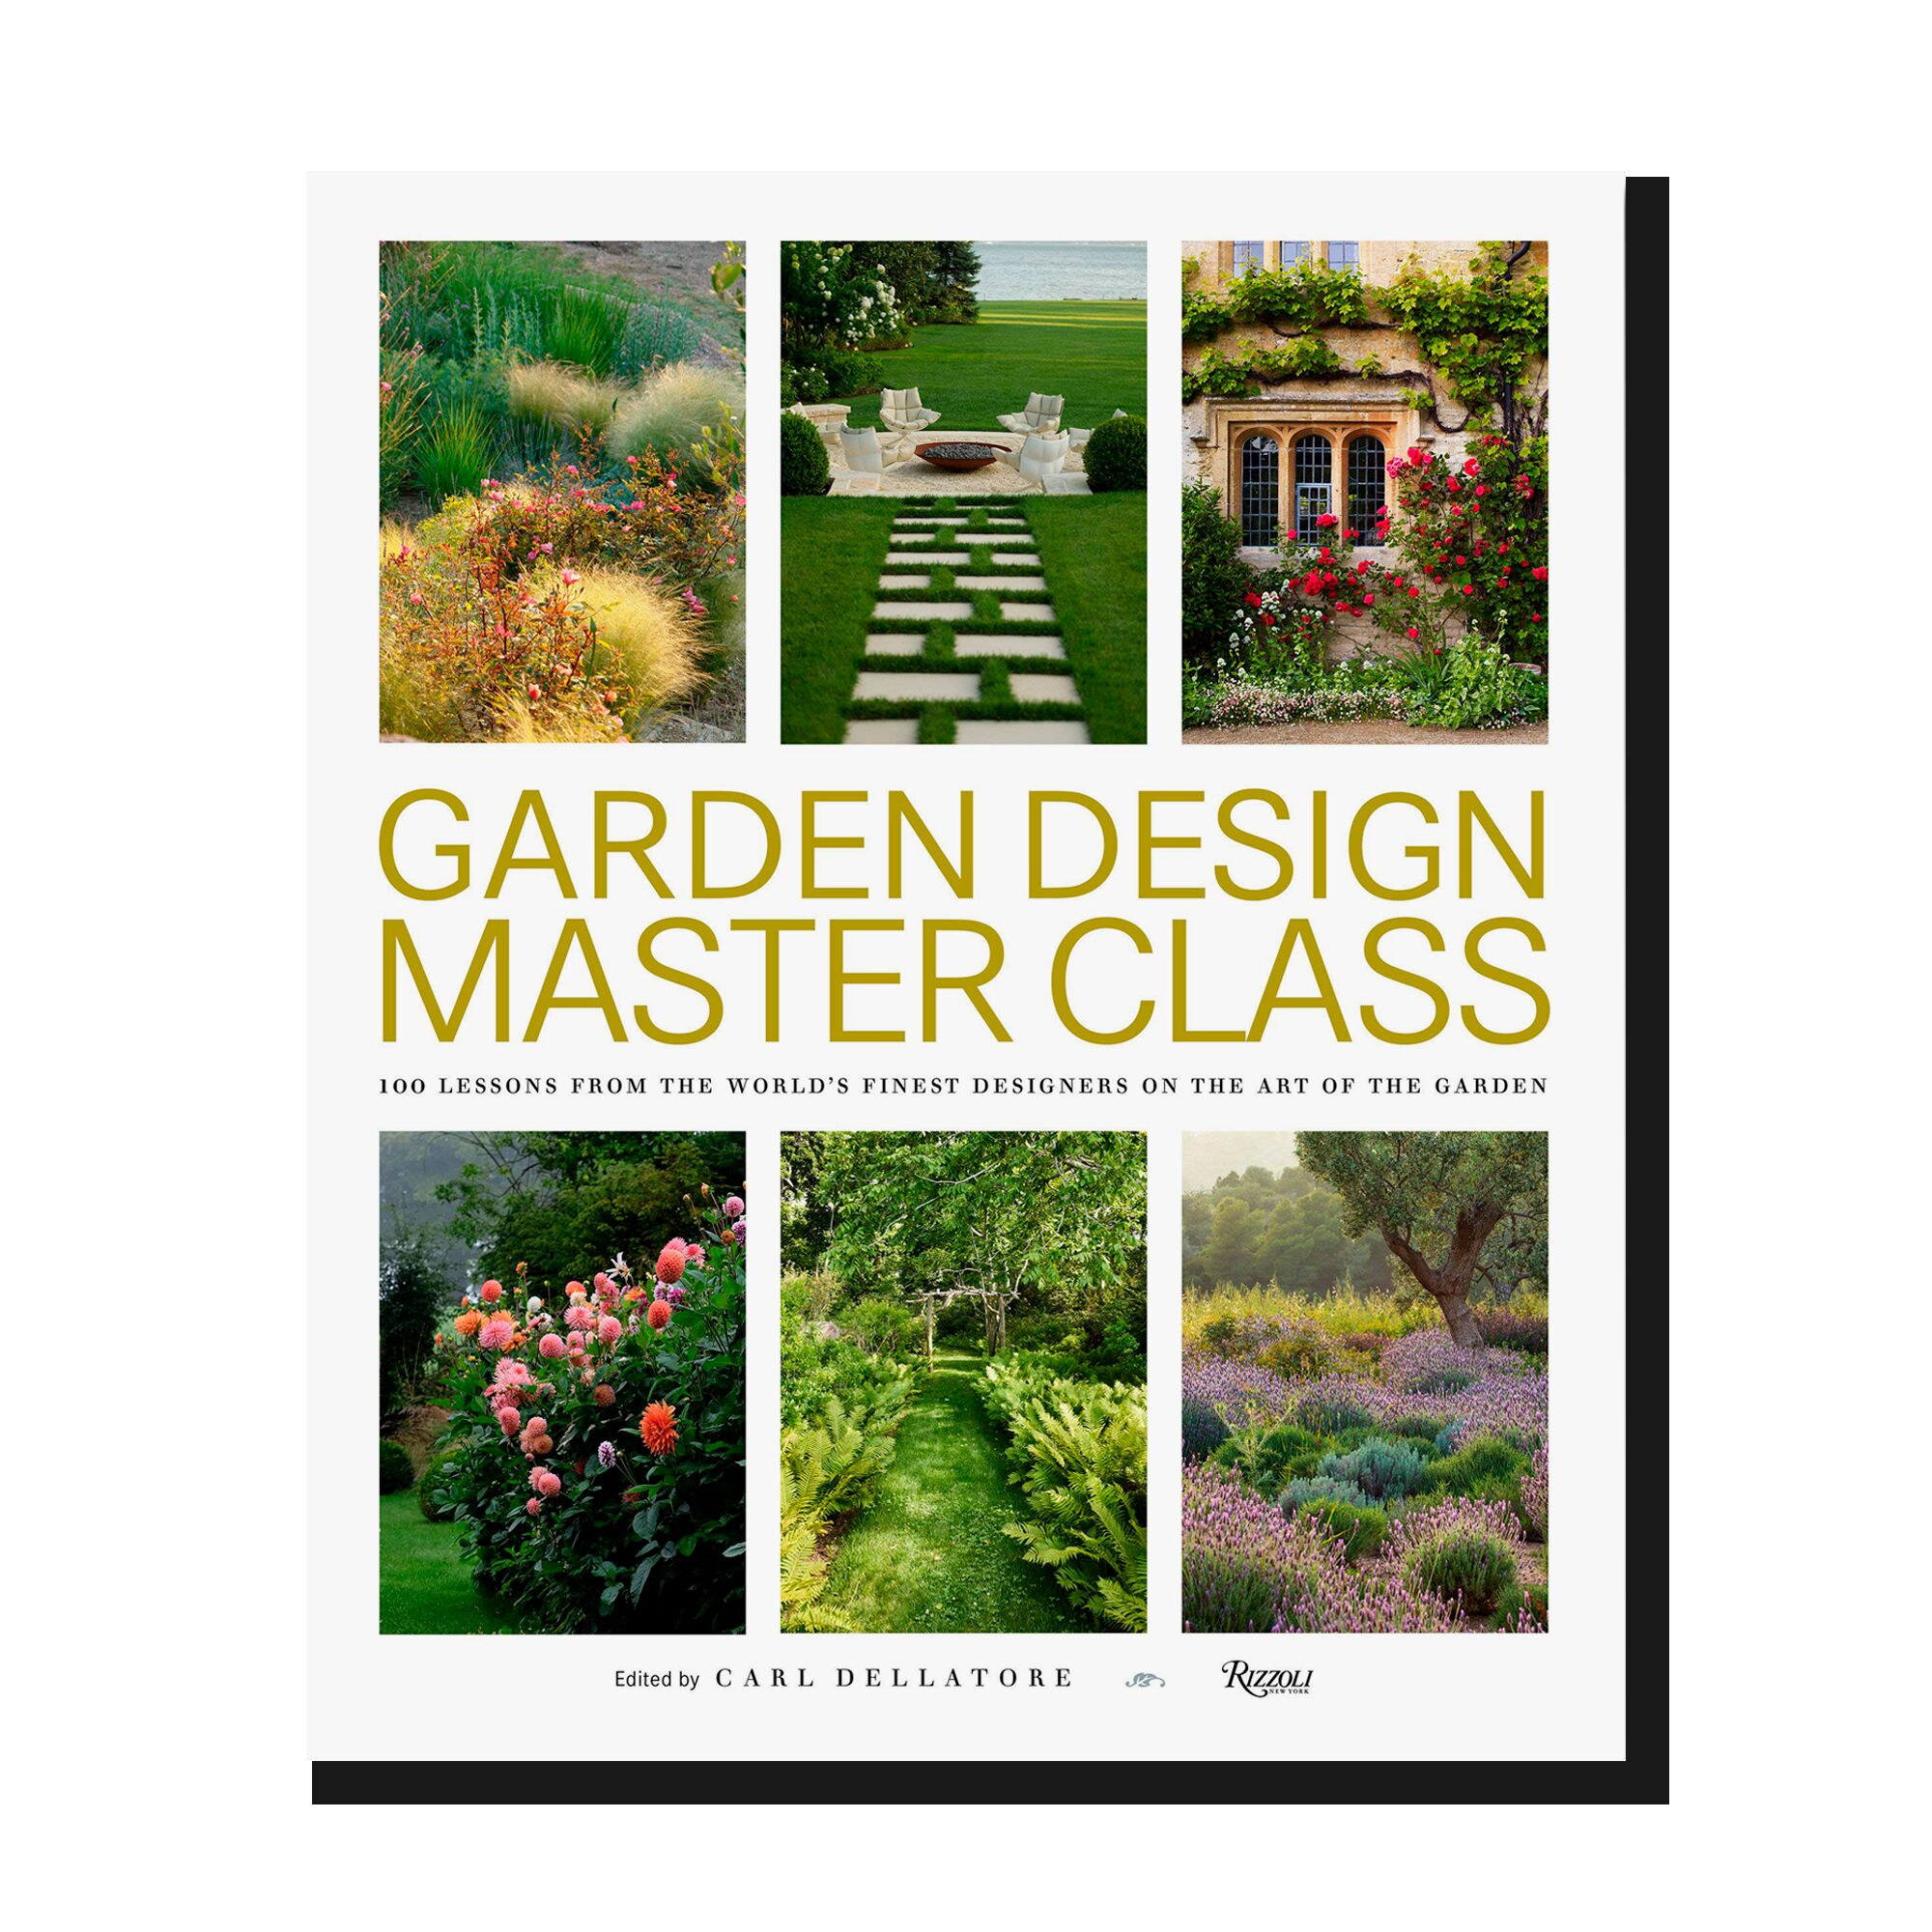 Garden Design Master Class: 100 Lessons from The World's Finest Designers on the Art of the Garden